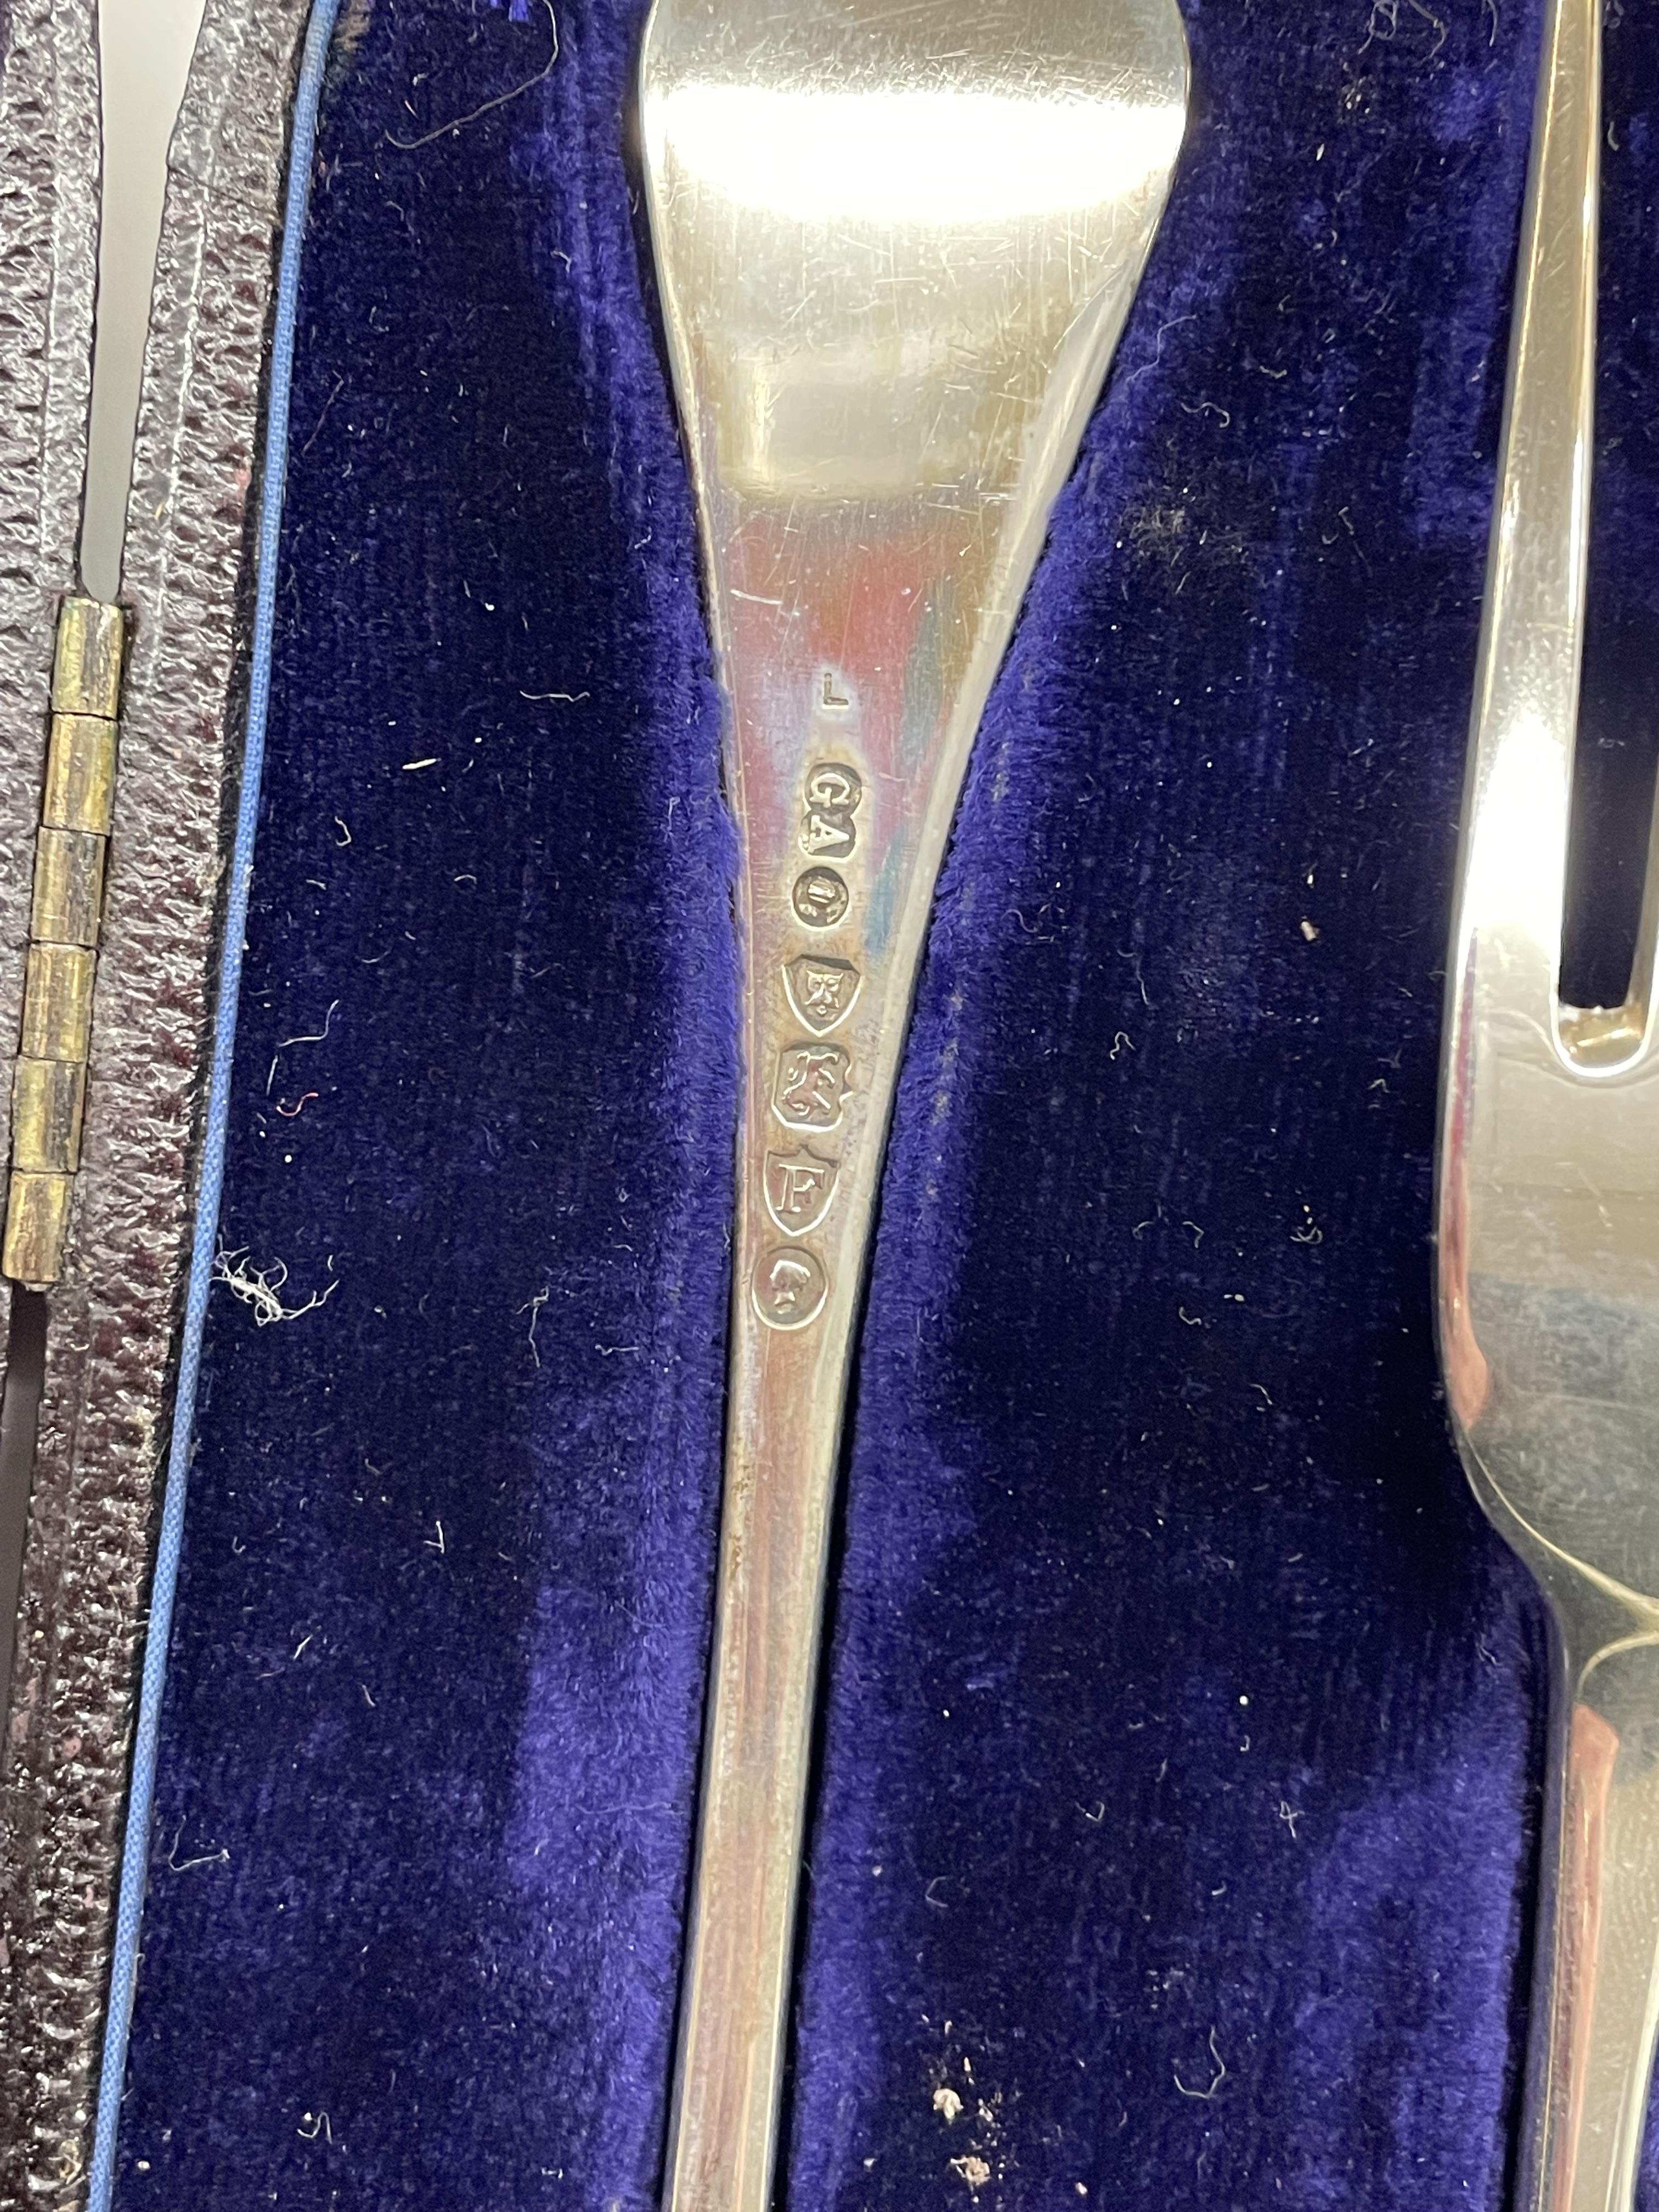 CASED MAPPIN BROTHERS LONDON SILVER SPOON AND FORK BY GEORGE ANGEL - Image 2 of 4